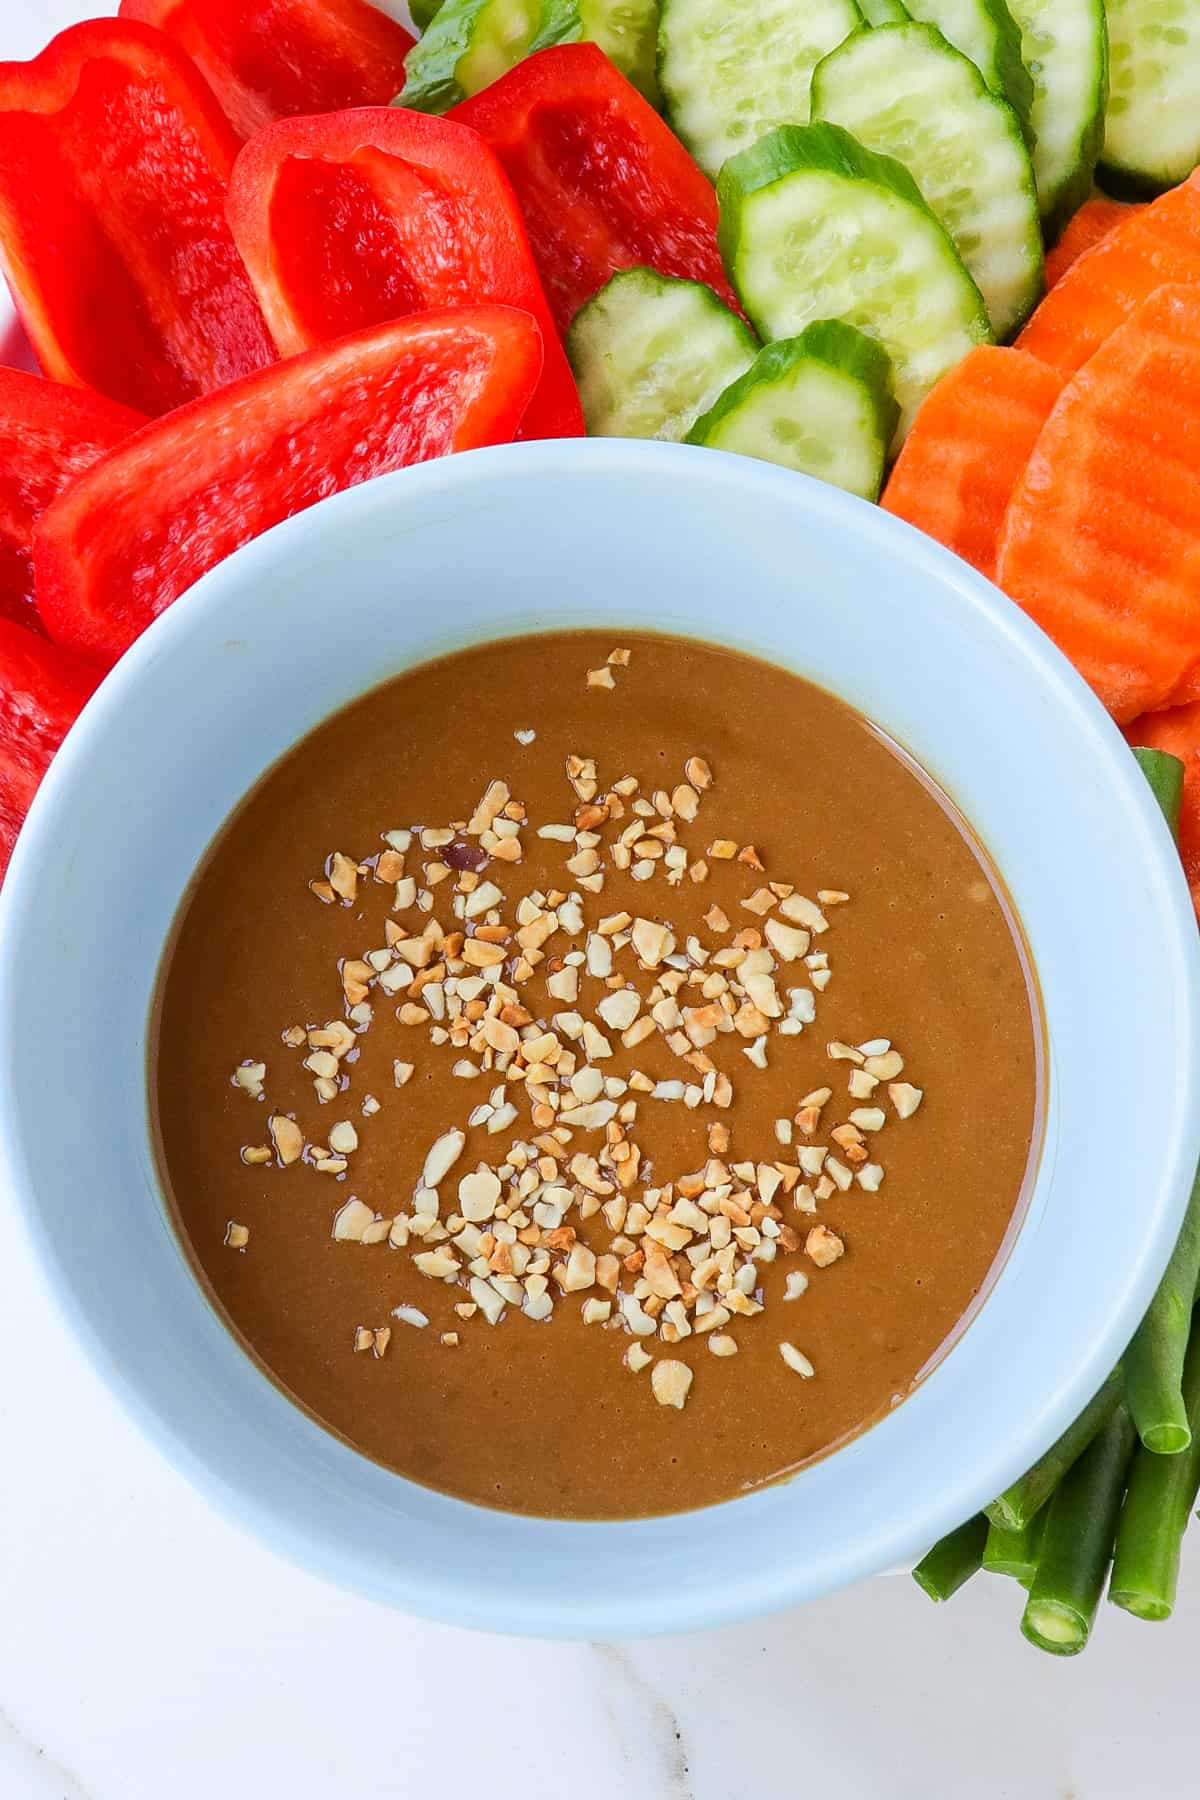 Peanut butter hoisin sauce in a bowl with slices veggies around.